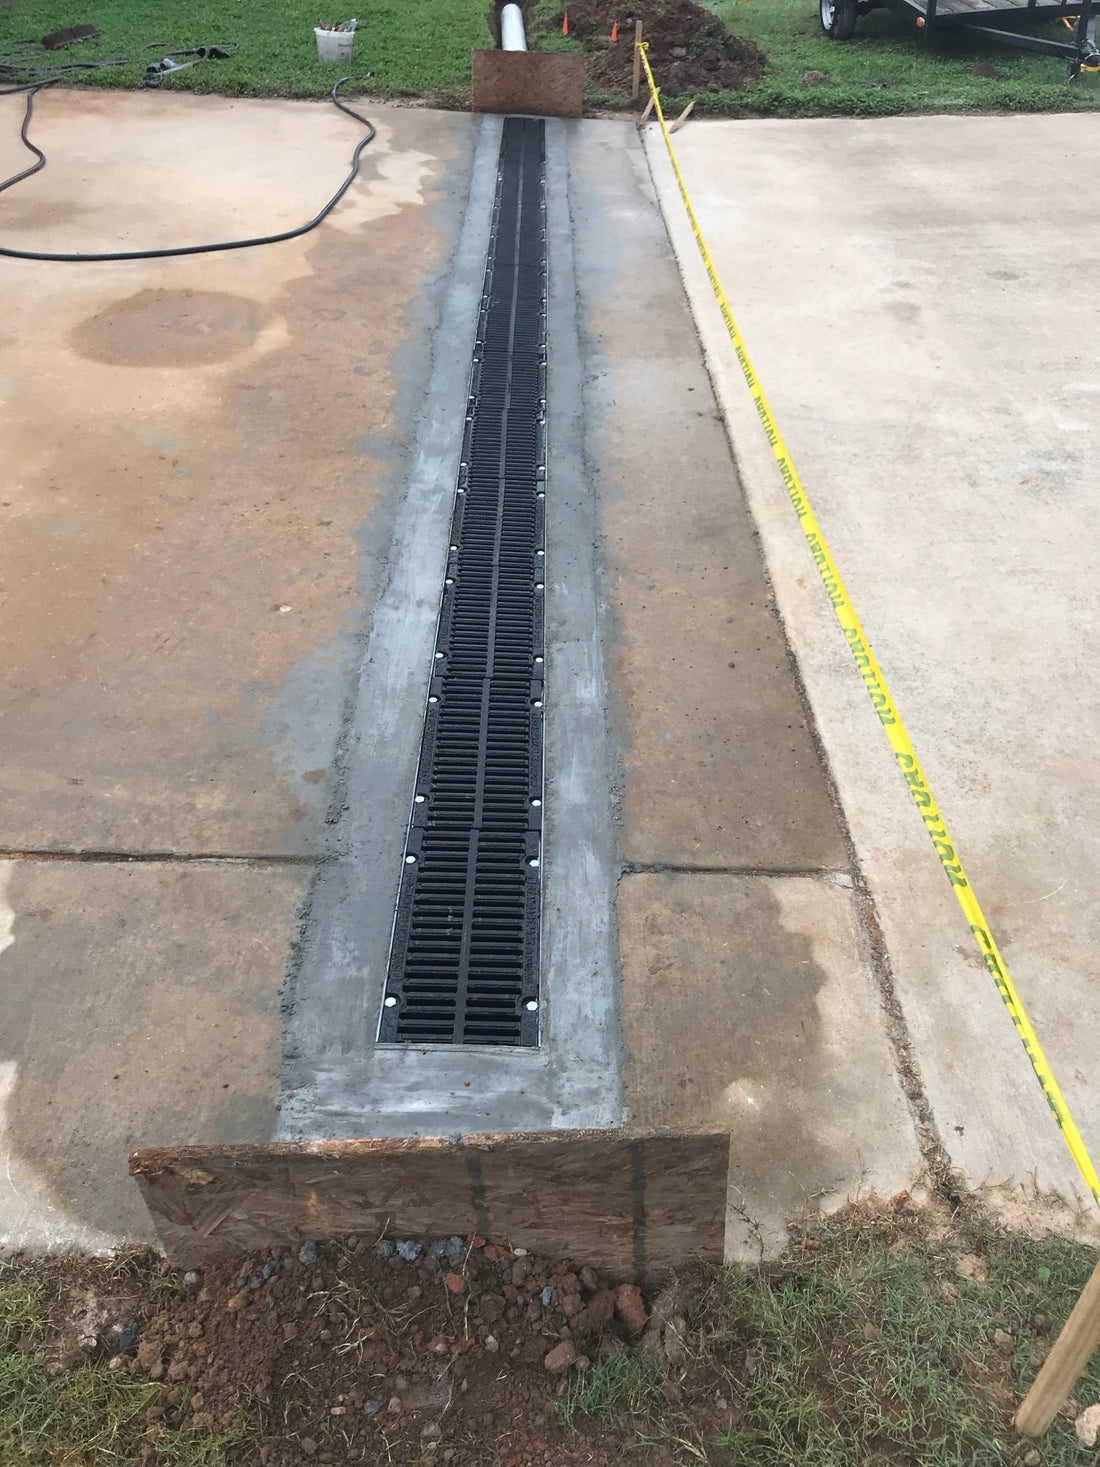 8" Channel on our driveway - Vodaland